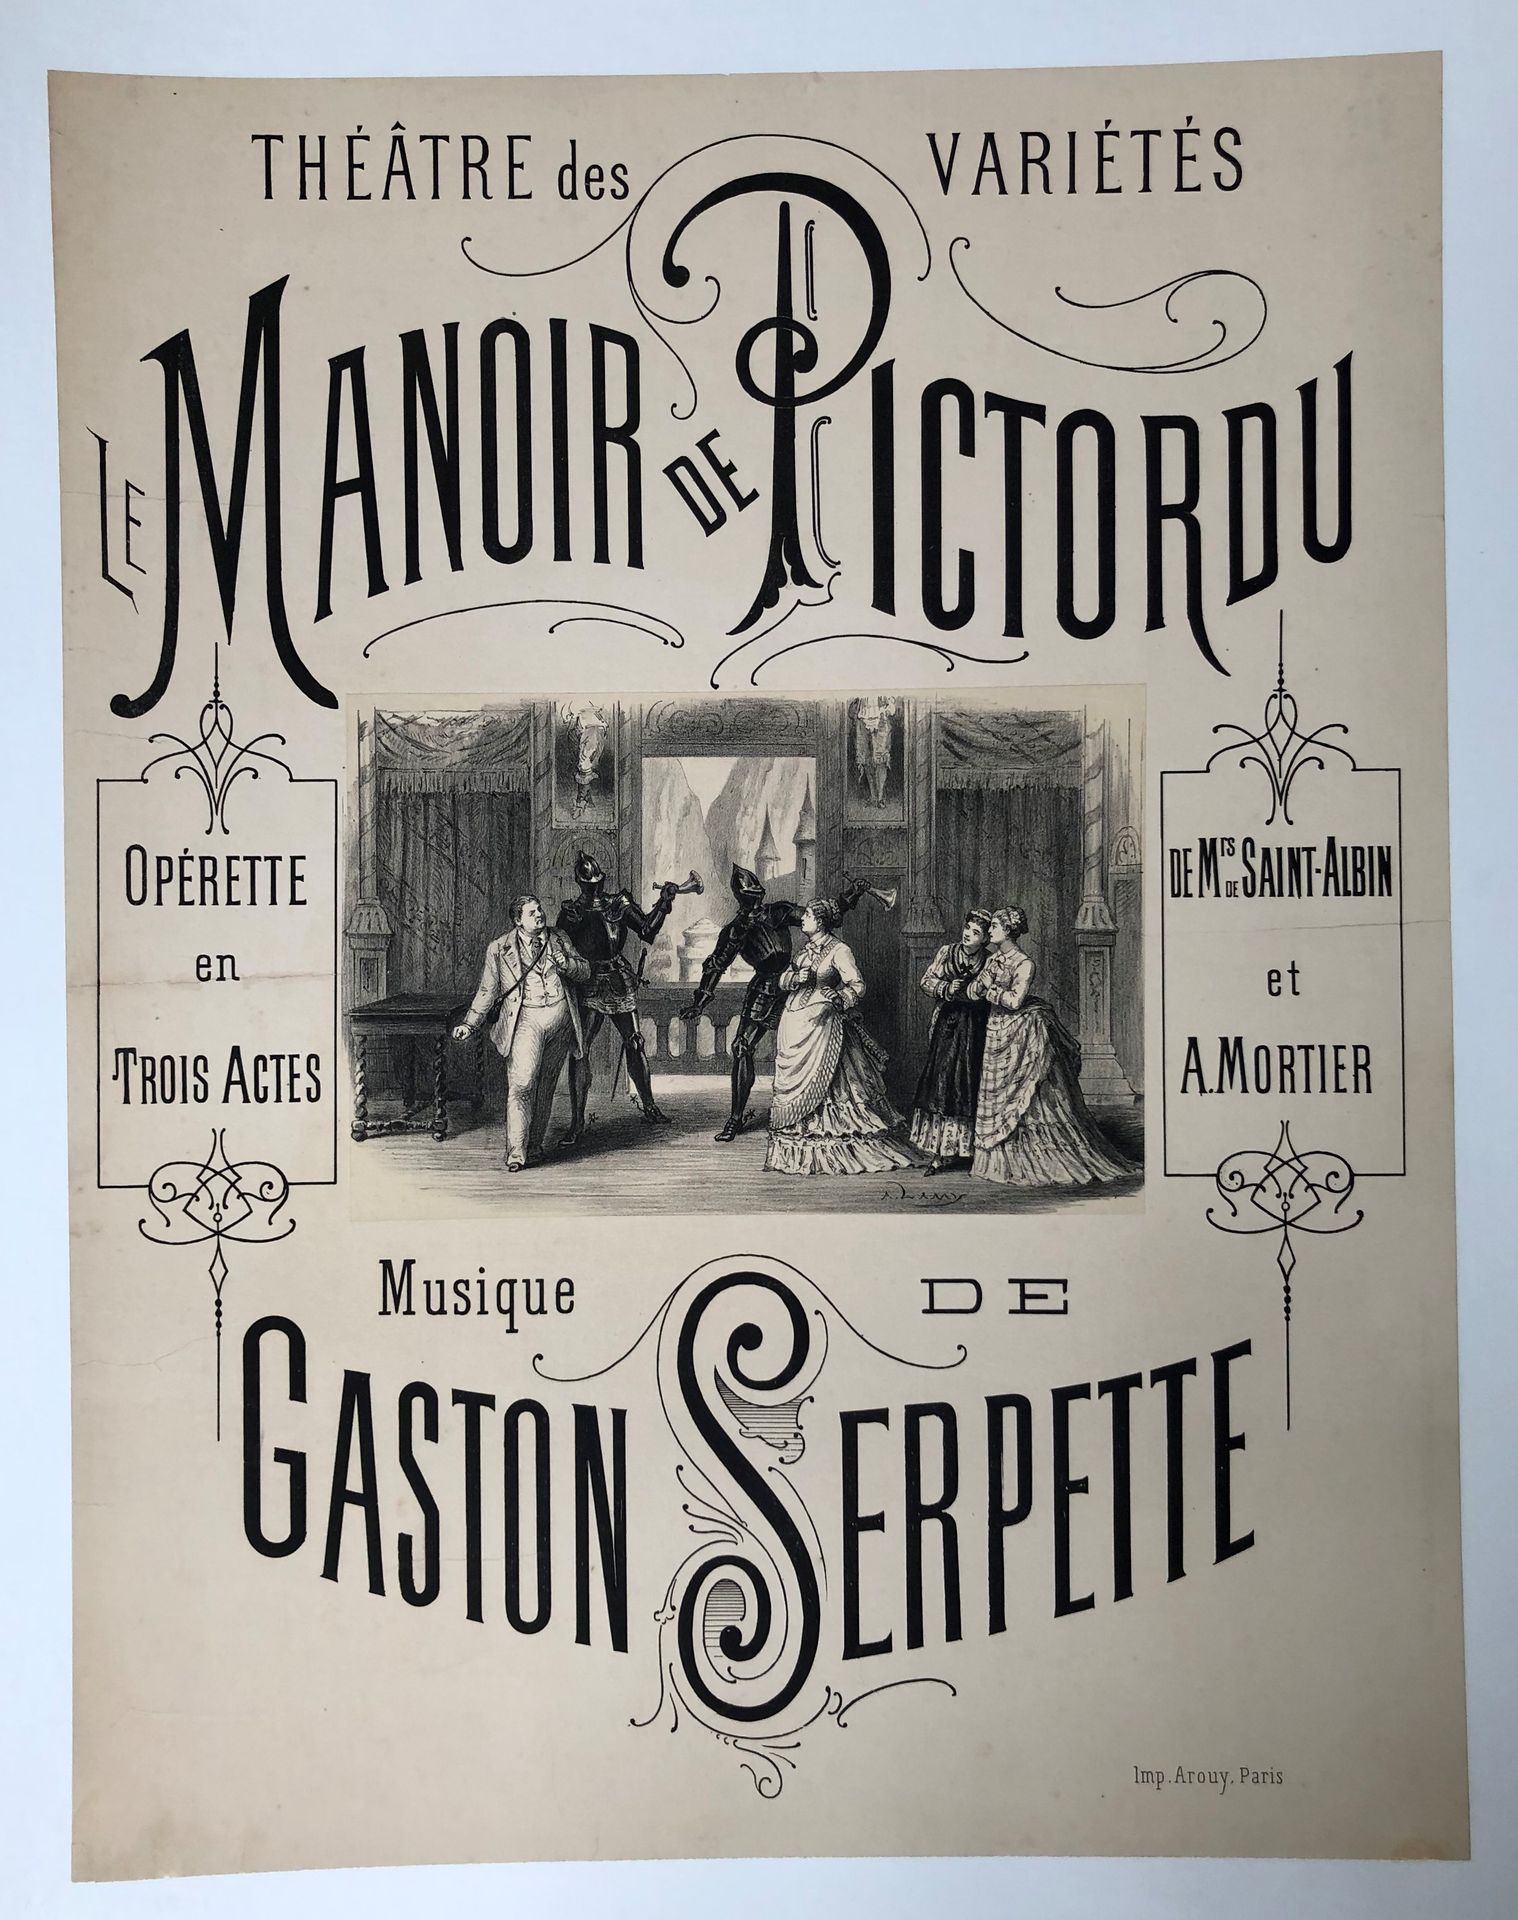 Null Lot including 21 posters:
-Gaston SERPETTE (1846-1904). The manor of Pictor&hellip;